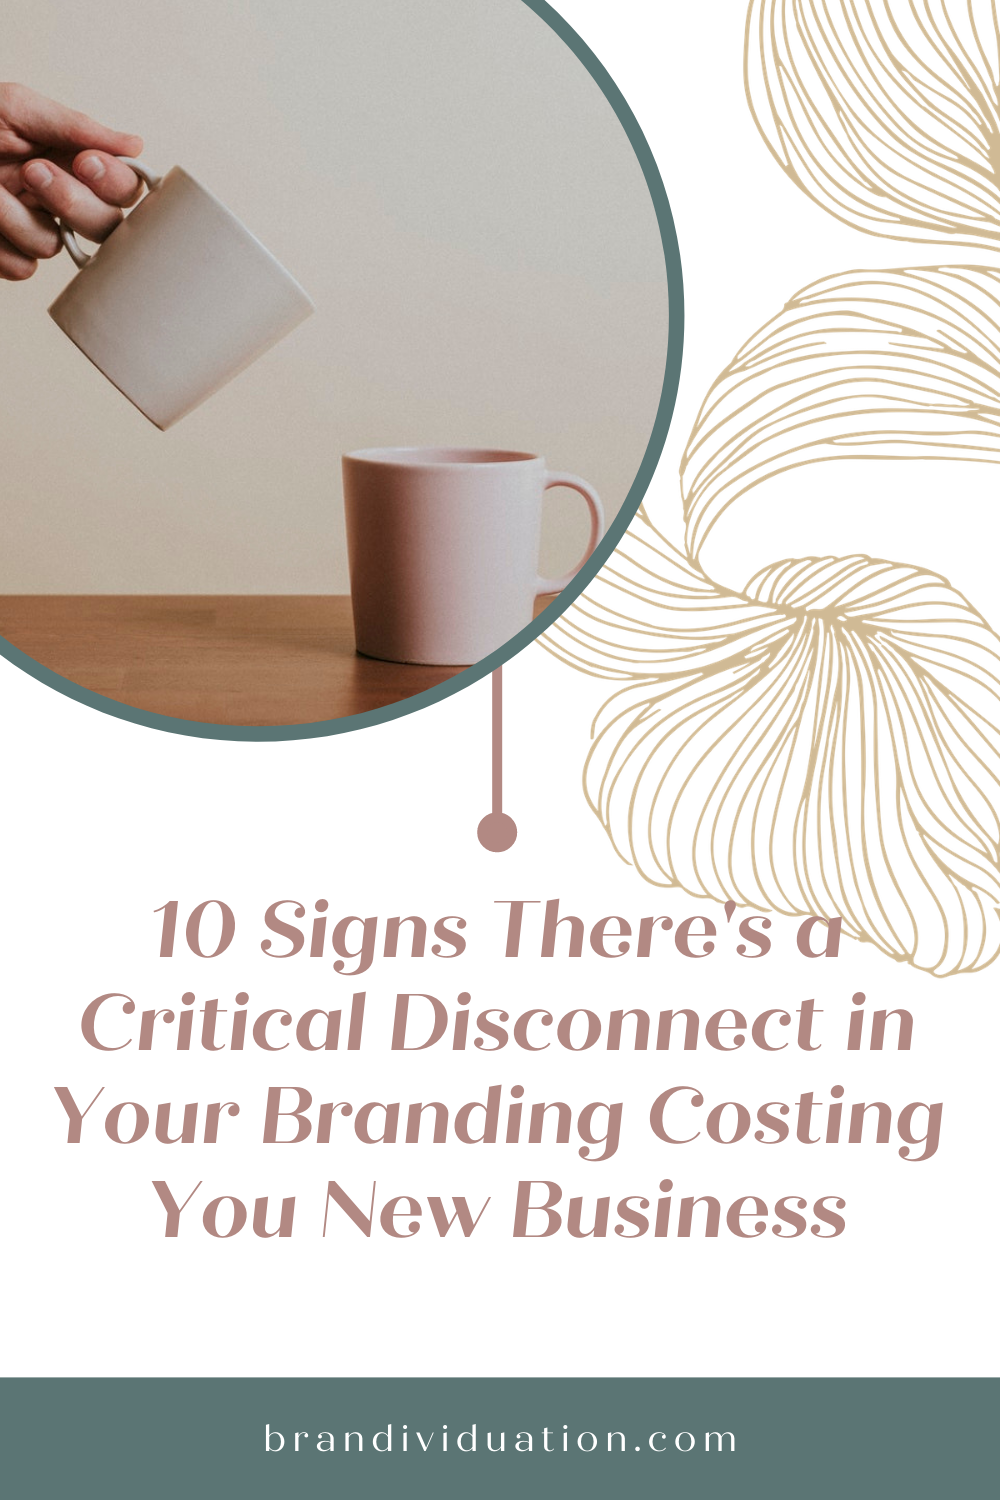 10 Signs There's a Critical Disconnect in Your Branding Costing You New Business